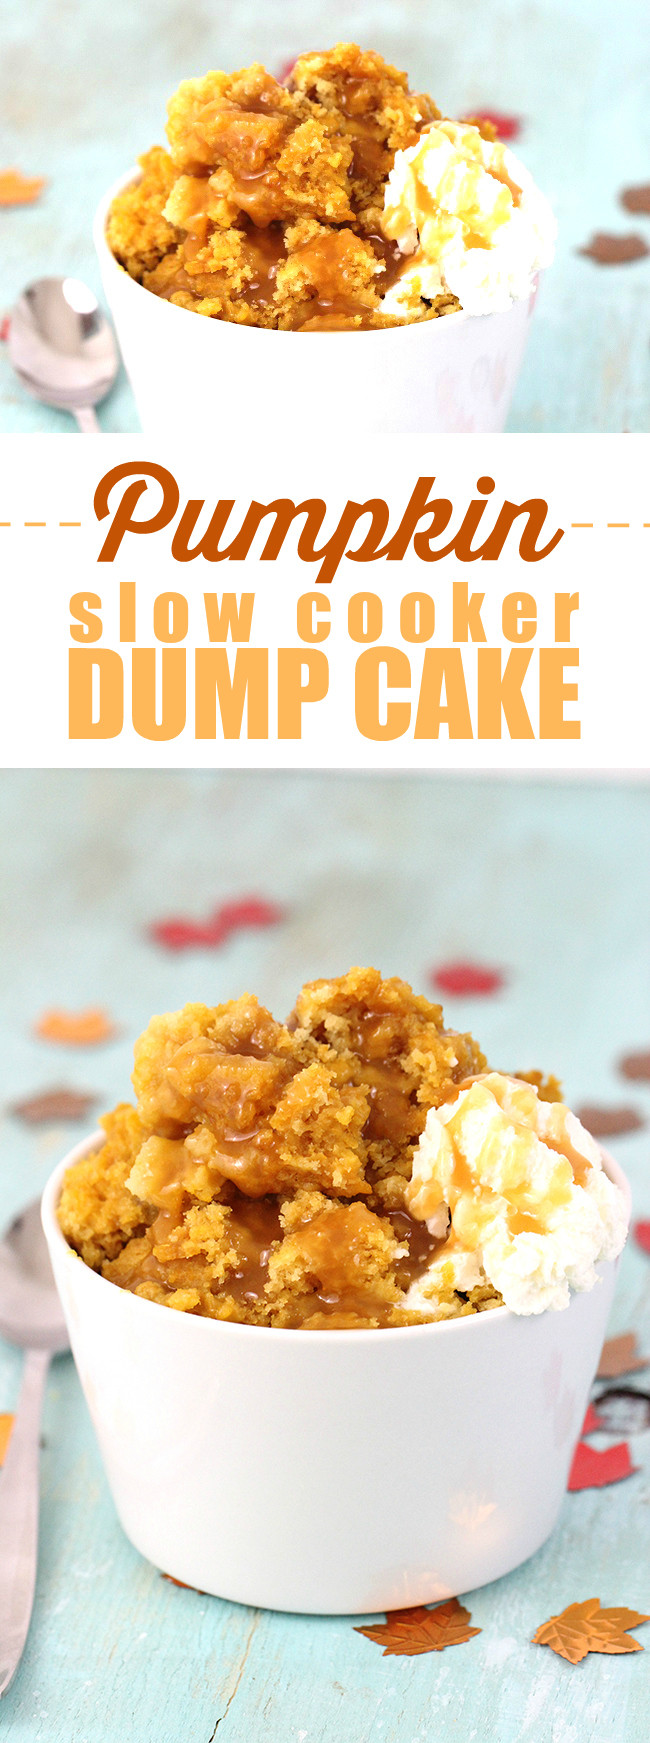 Slow Cooker Cake Recipes With Yellow Cake Mix
 Slow Cooker Pumpkin Dump Cake